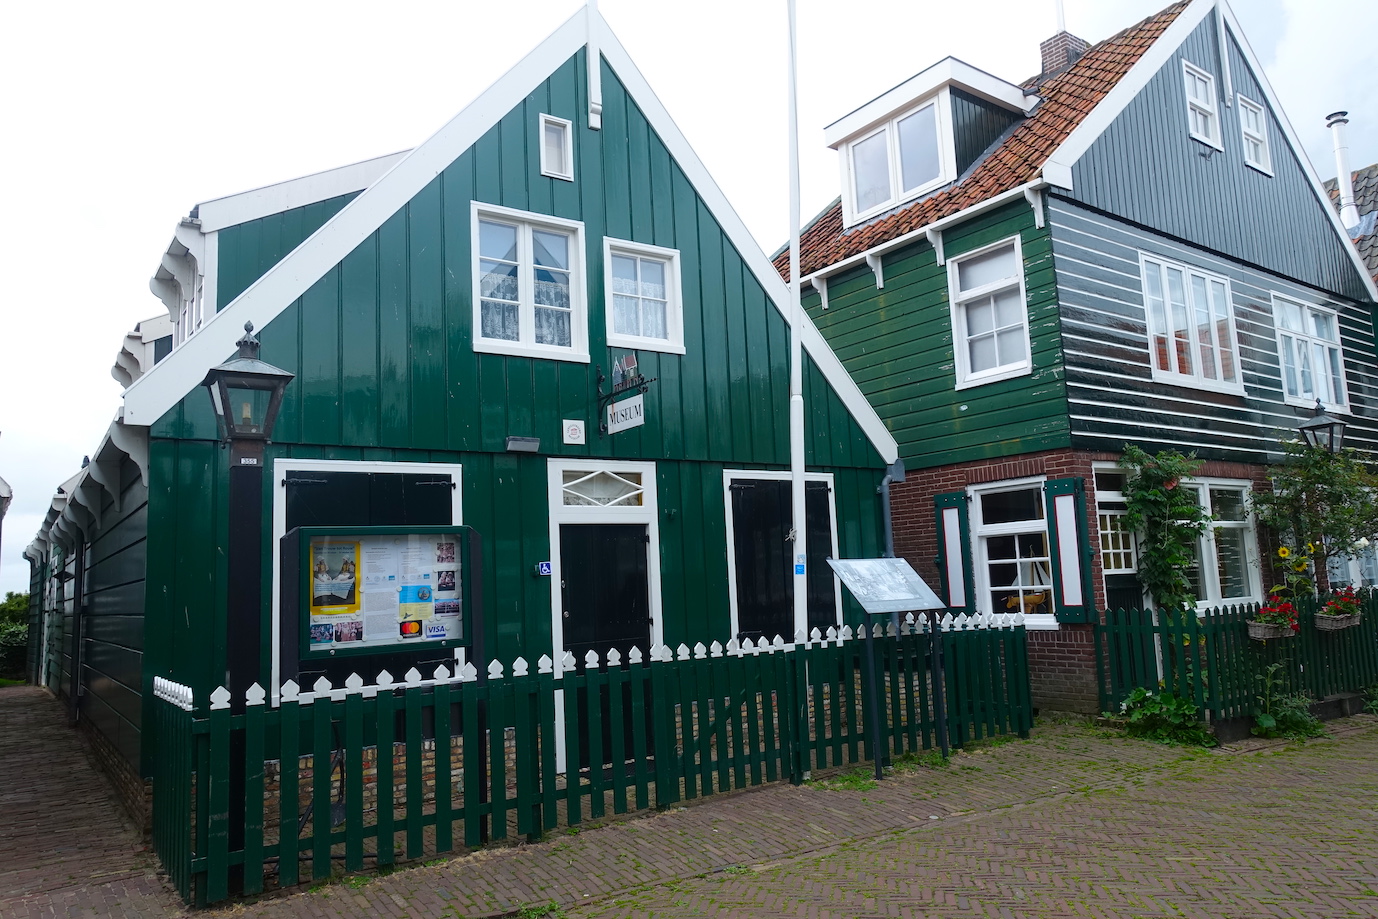 A view of the Marken museum, that is a green typical Marken wooden house